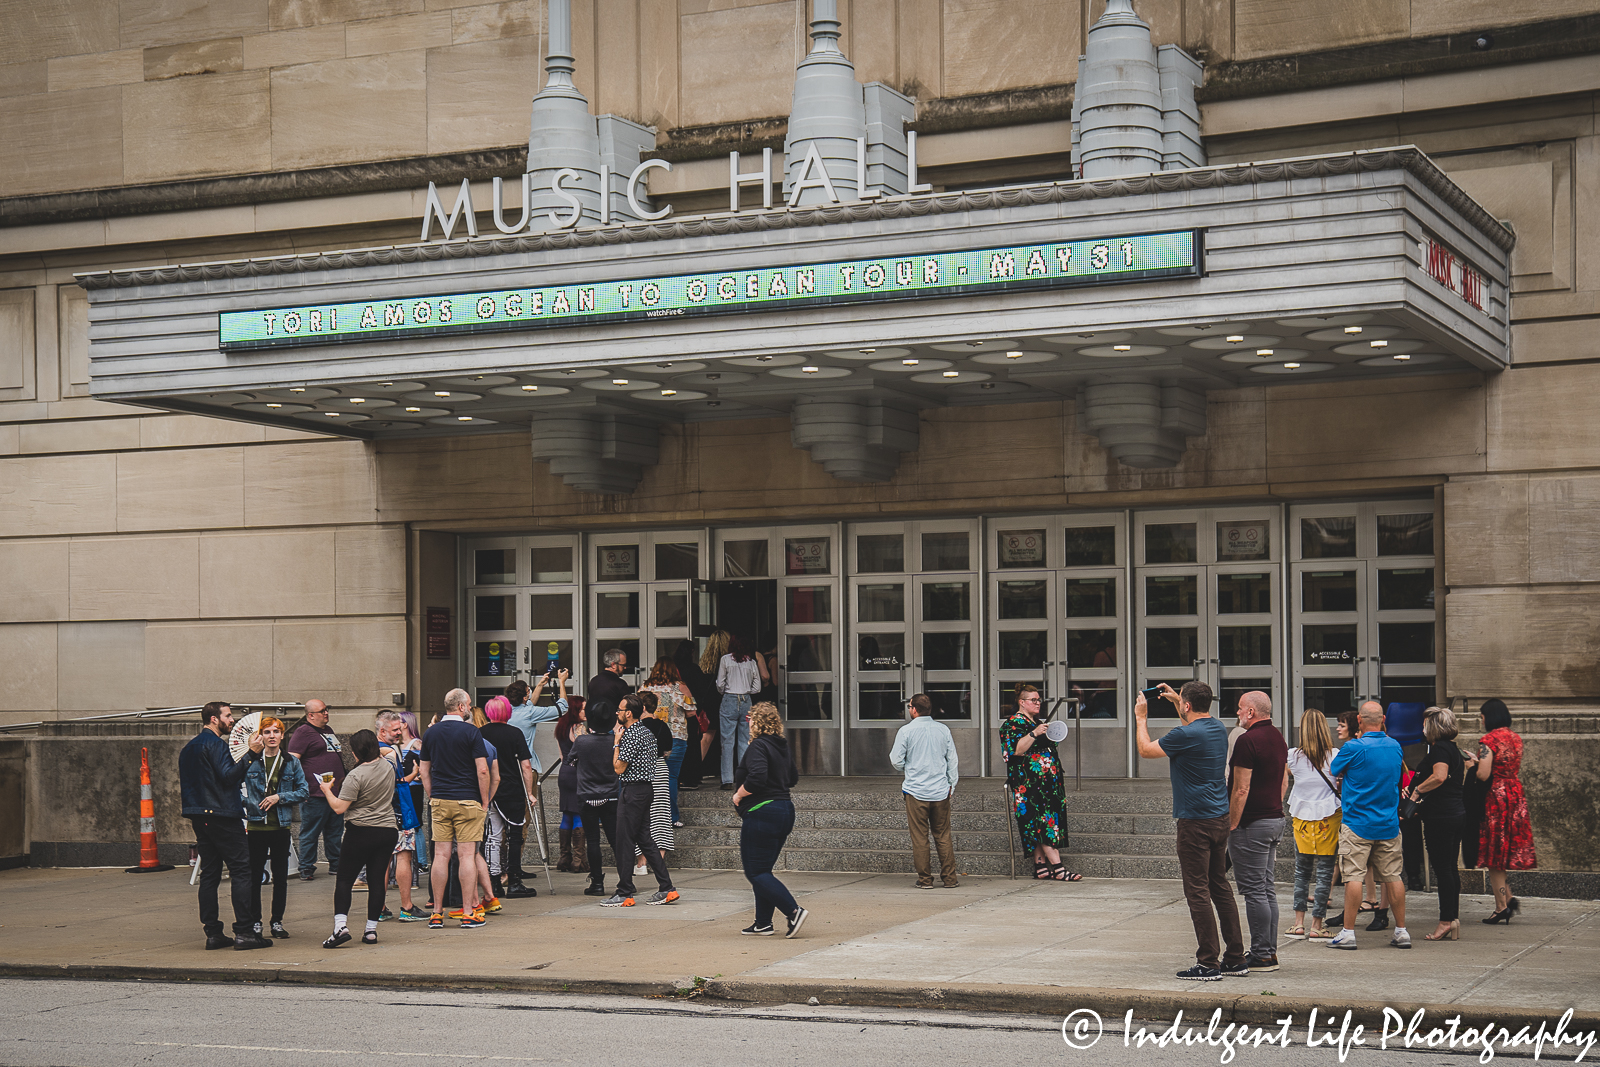 Marquee outside of Music Hall in downtown Kansas City, MO featuring singer-songwriter and pianist Tori Amos on May 31, 2022.